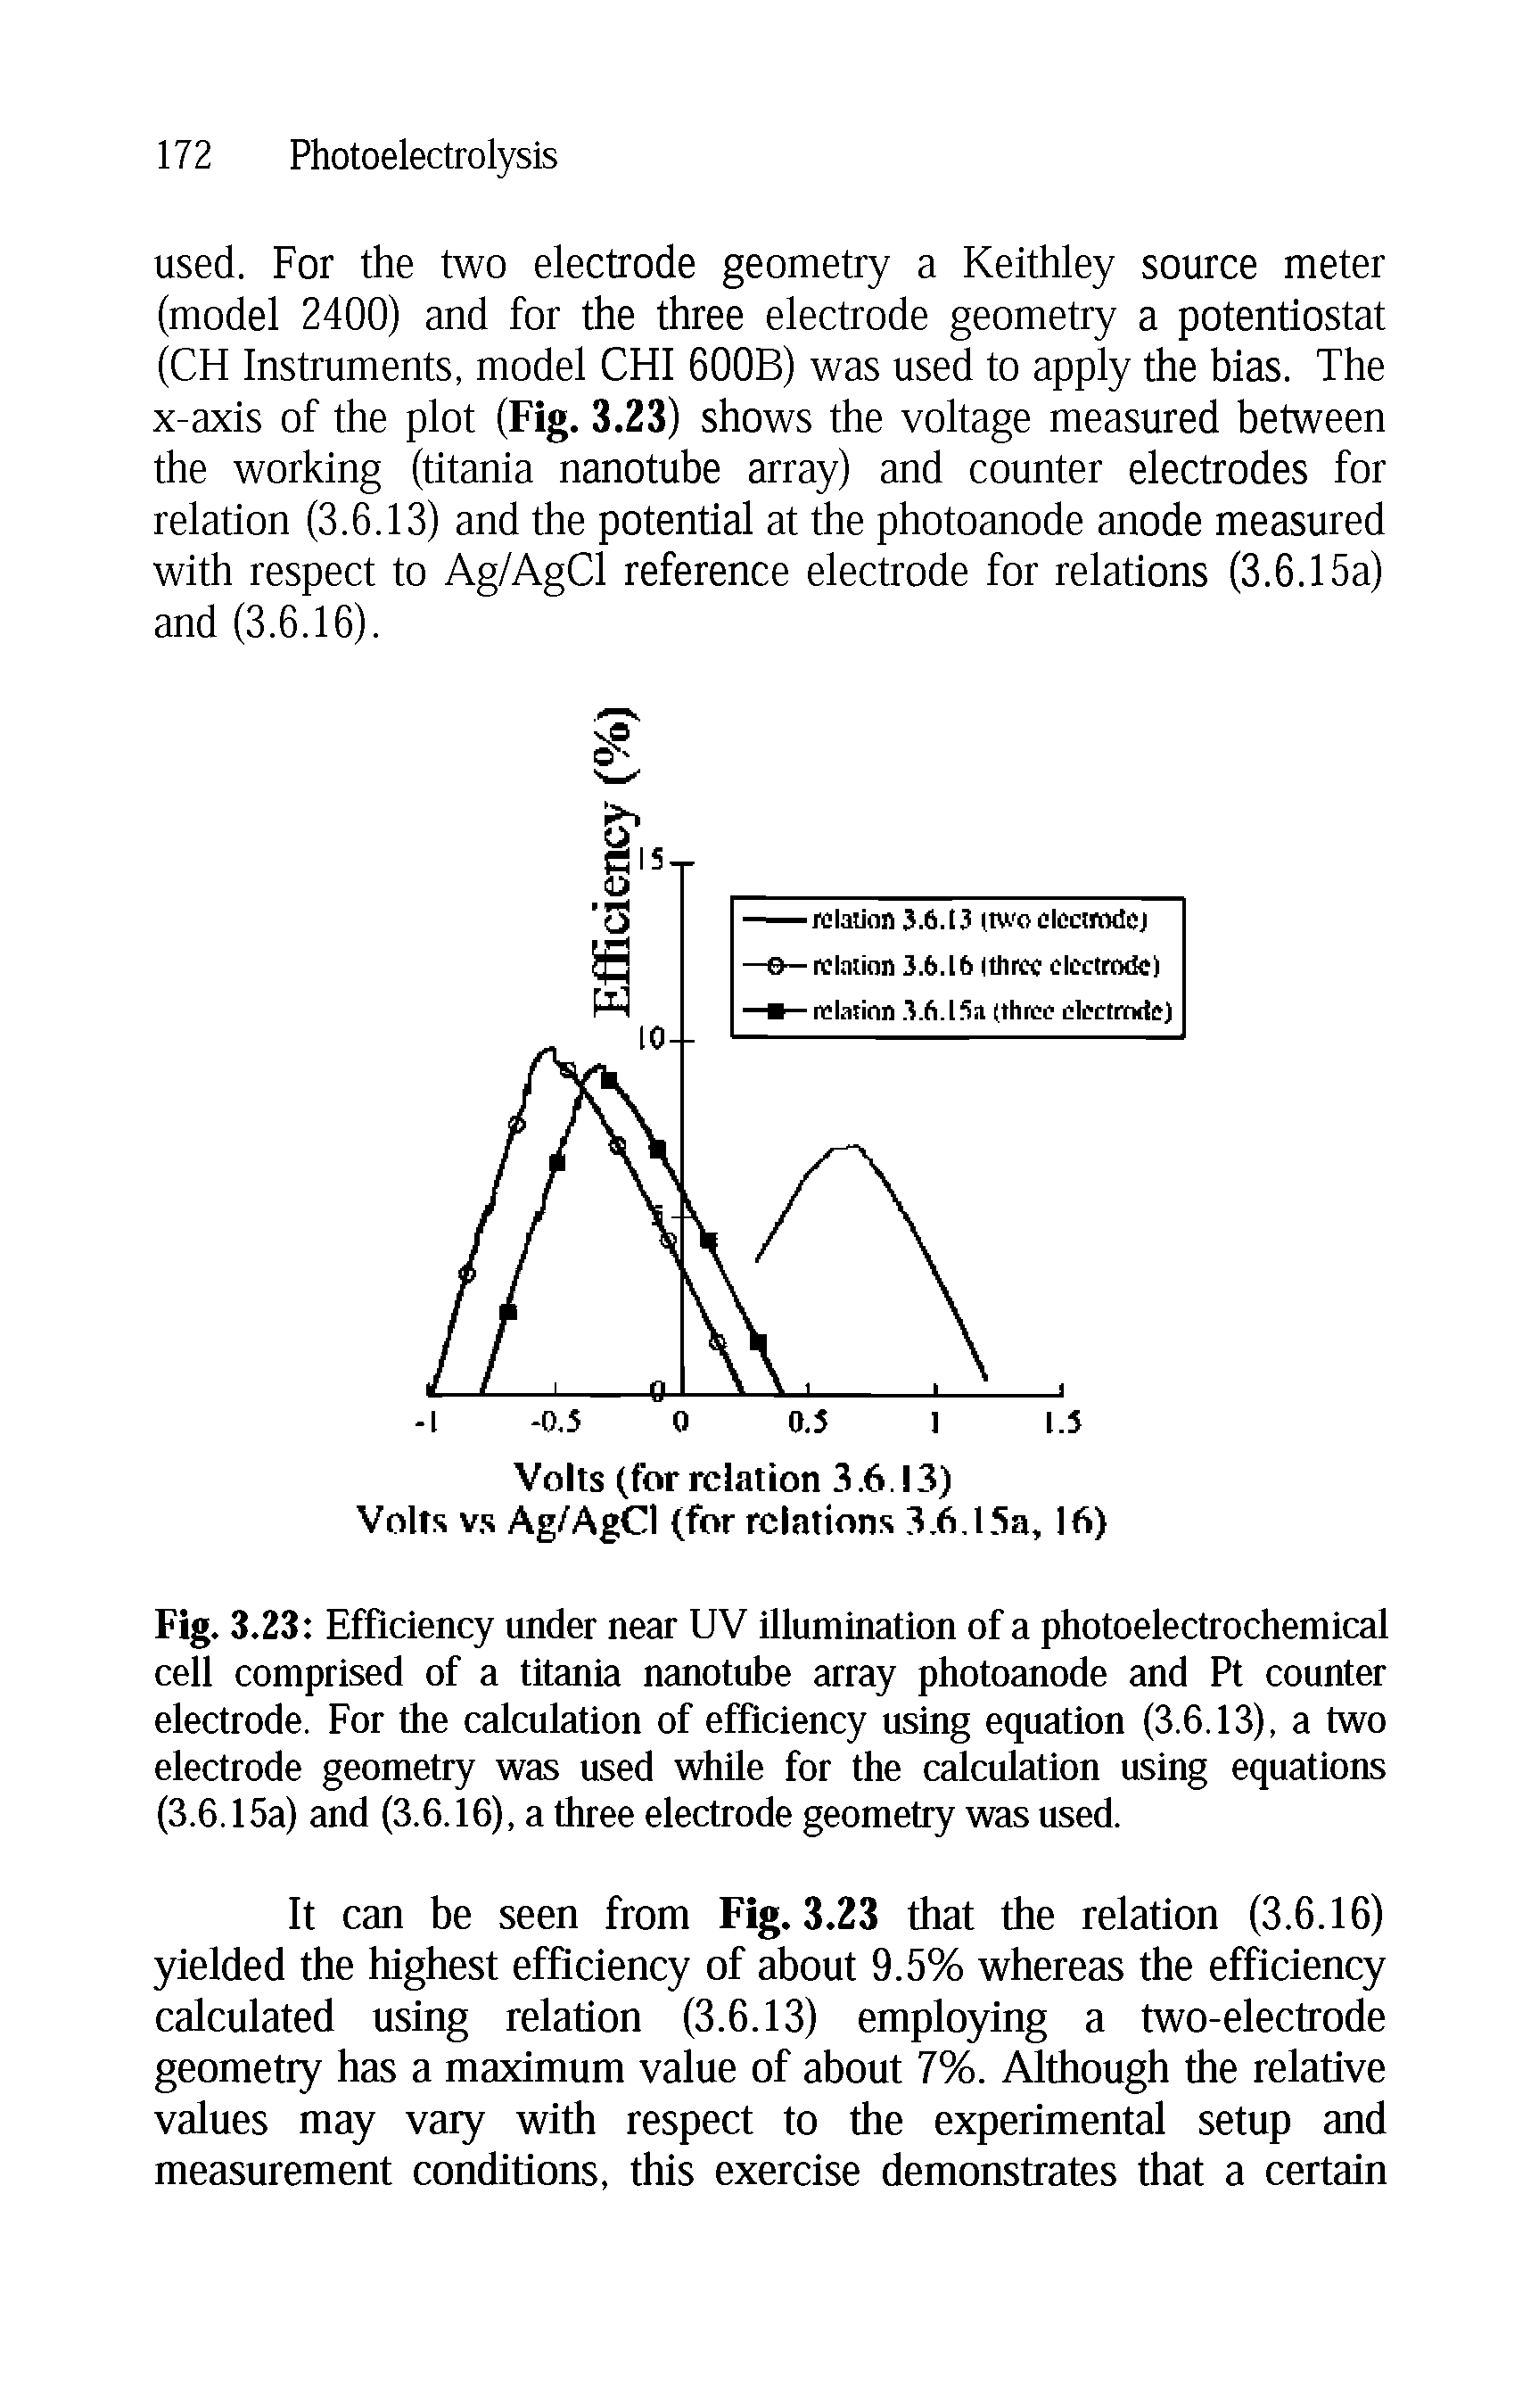 Fig. 3.23 Efficiency under near UV illumination of a photoelectrochemical cell comprised of a titania nanotube array photoanode and Pt counter electrode. For the calculation of efficiency using equation (3.6.13), a two electrode geometry was used while for the calculation using equations (3.6.15a) and (3.6.16), a three electrode geometry was used.